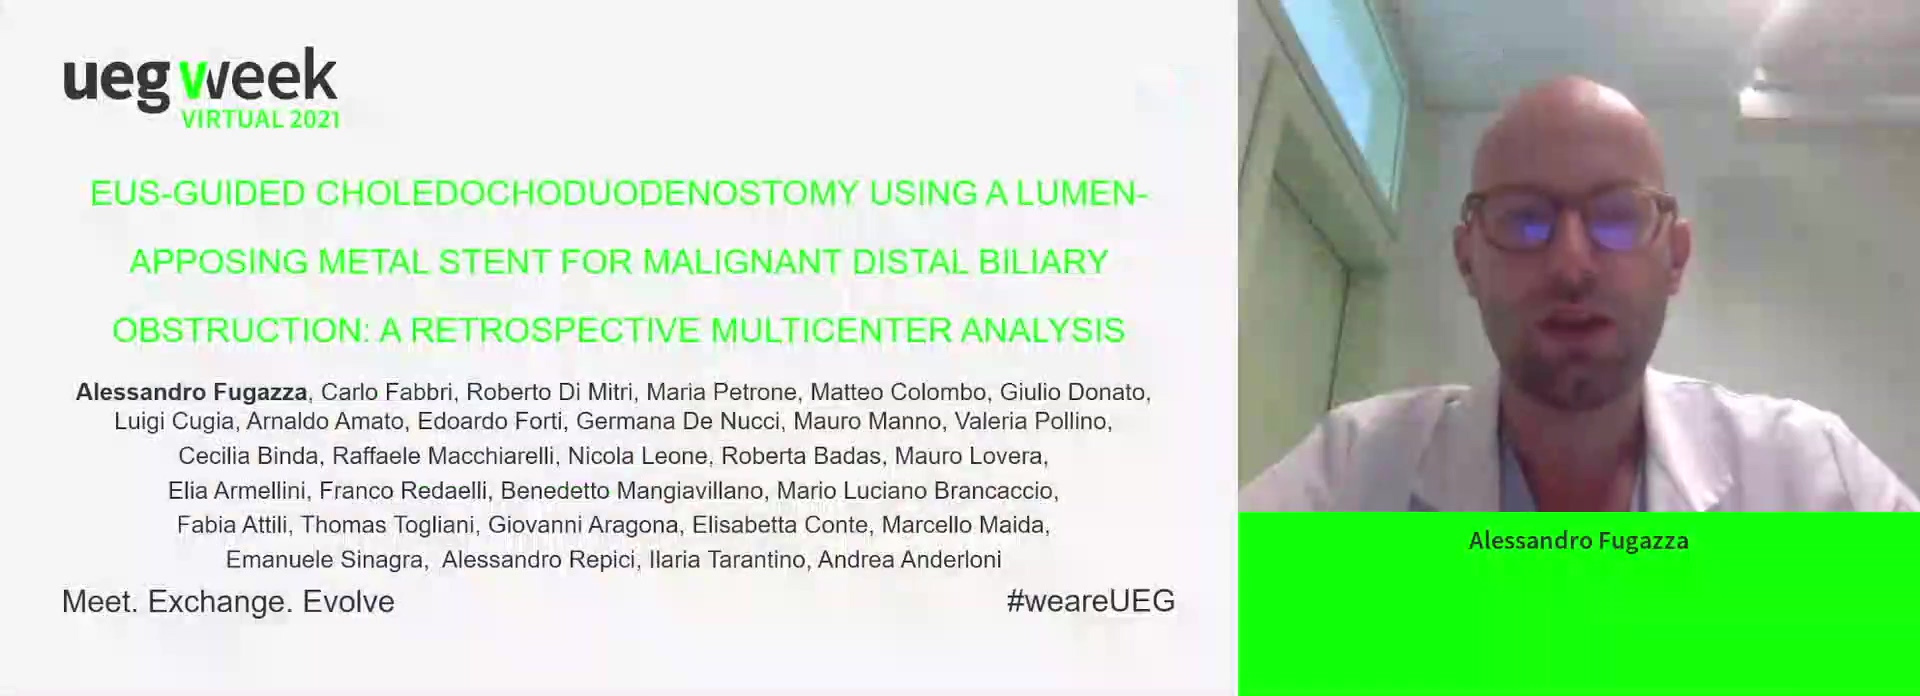 EUS-GUIDED CHOLEDOCHODUODENOSTOMY USING A LUMEN-APPOSING METAL STENT FOR MALIGNANT DISTAL BILIARY OBSTRUCTION: A RETROSPECTIVE MULTICENTER ANALYSIS